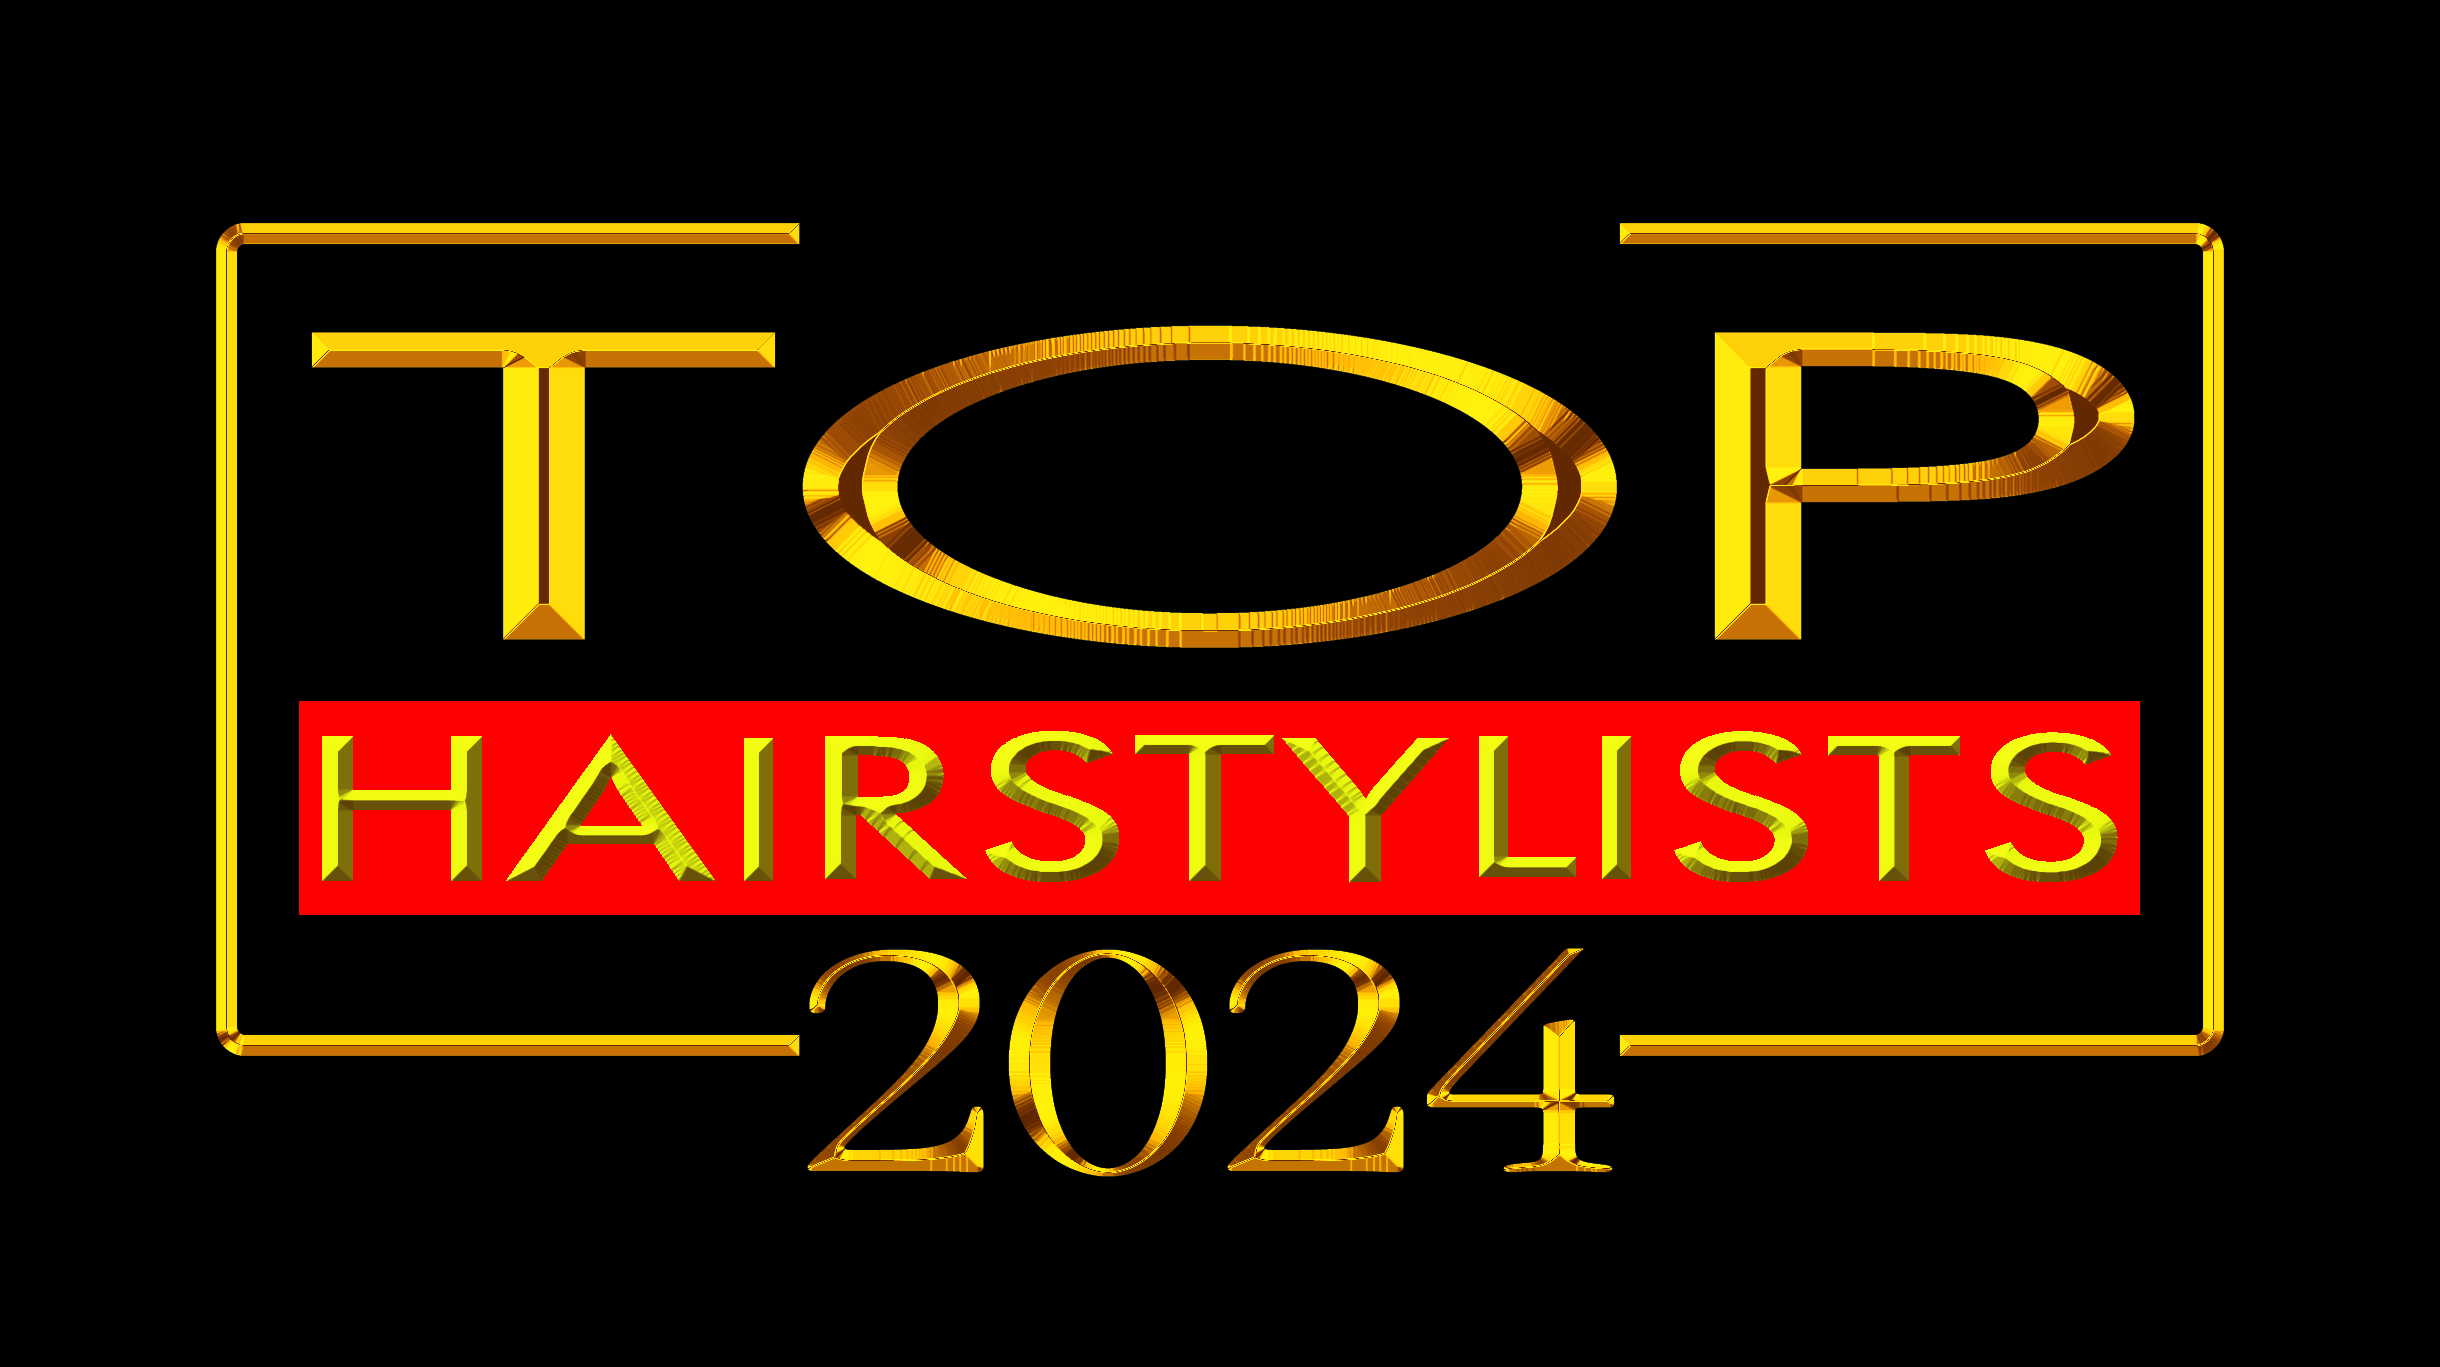 COSMOPROF ❤️ WORLDWIDE BOLOGNA 2024: le INTERVISTE ai TOP HAIRSTYLISTS 2024